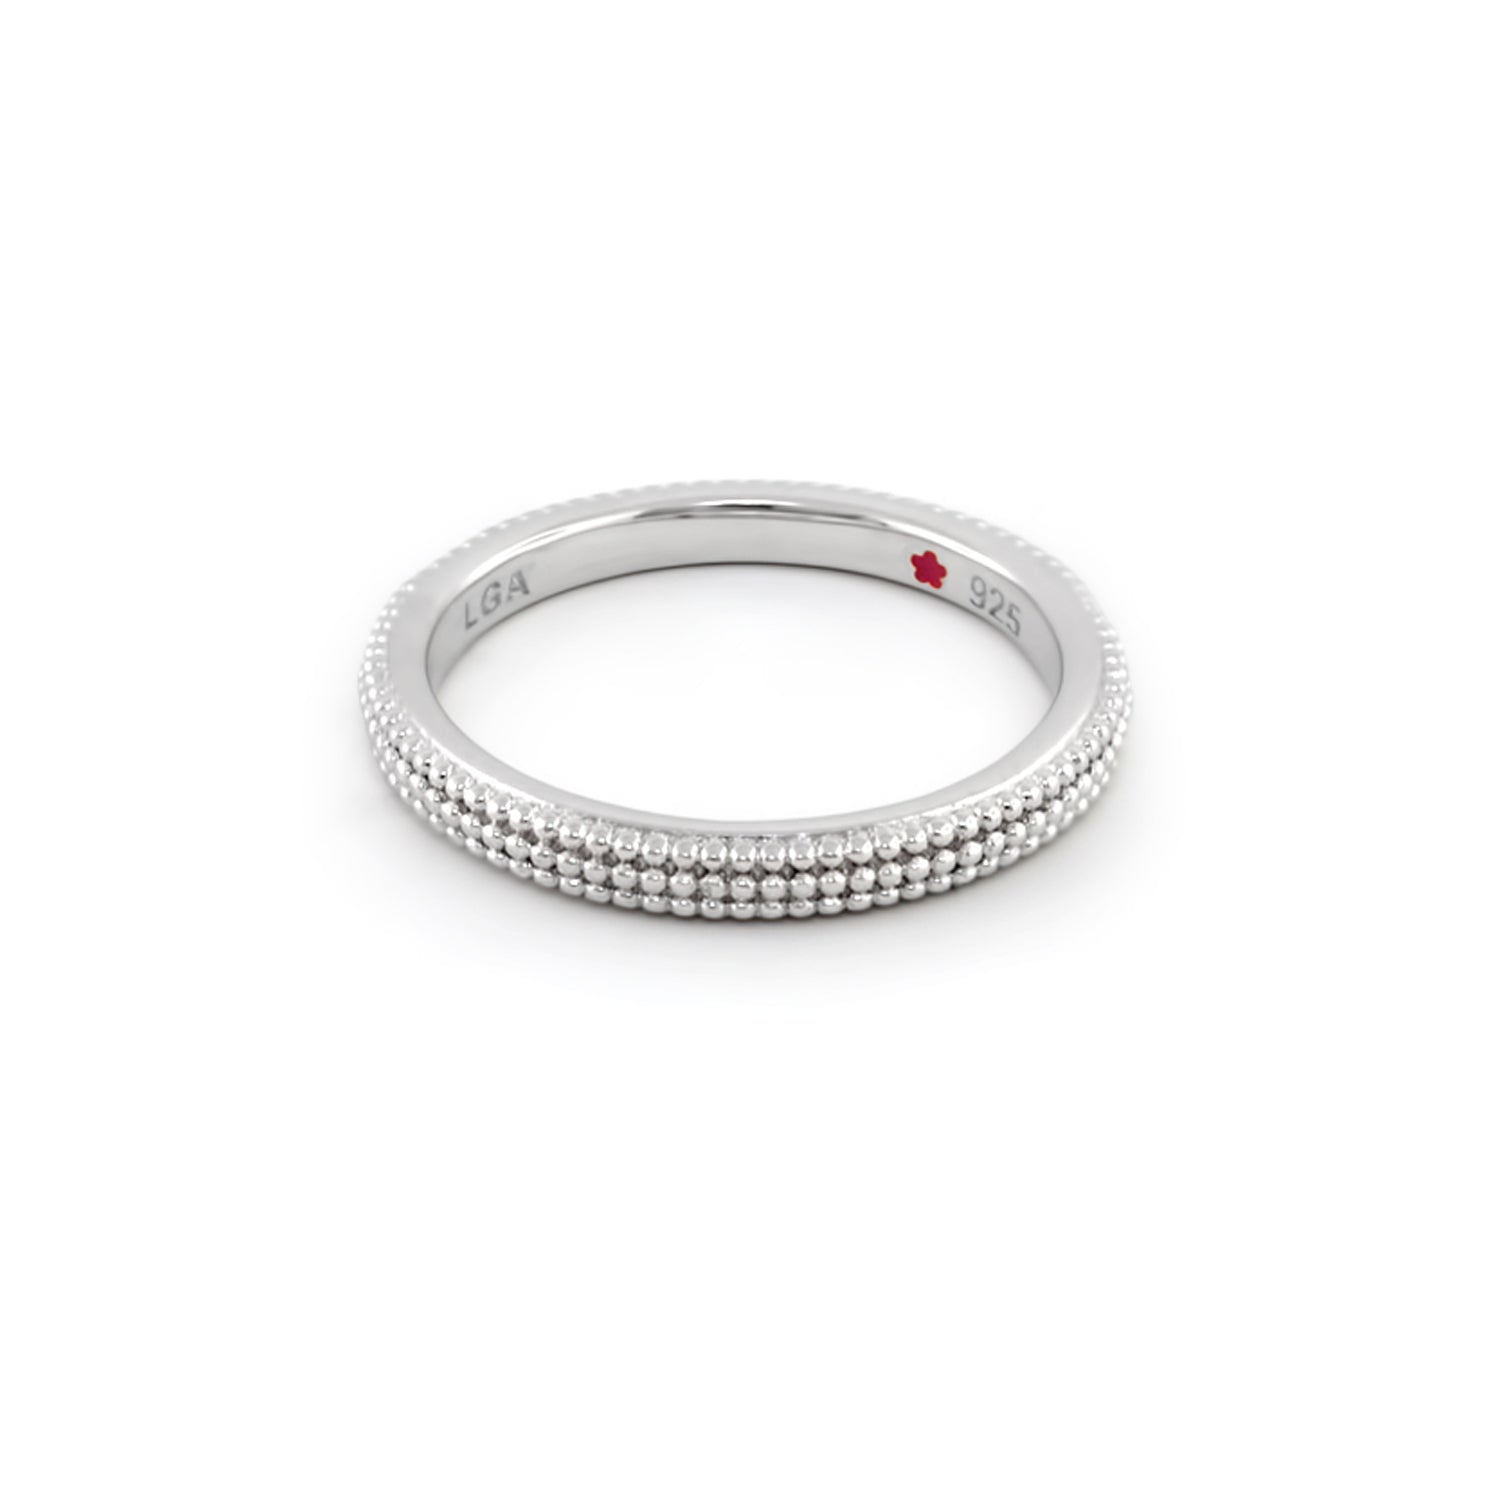 Layers of Love Stackable Ring